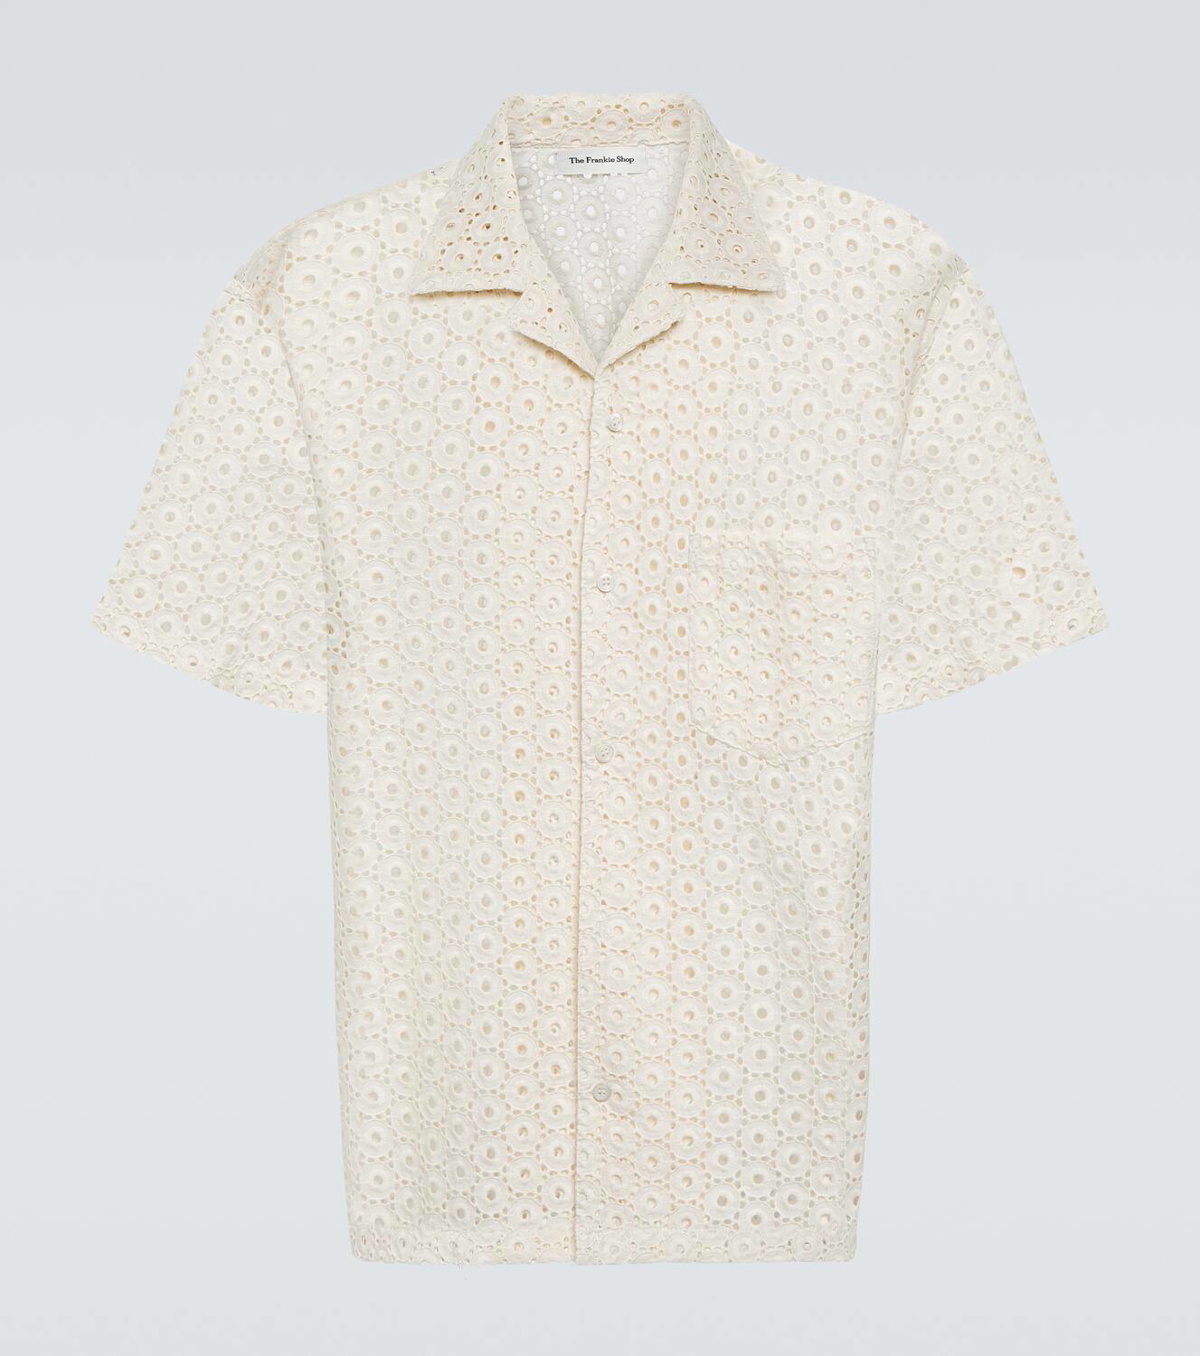 The Frankie Shop Embroidered cotton bowling shirt